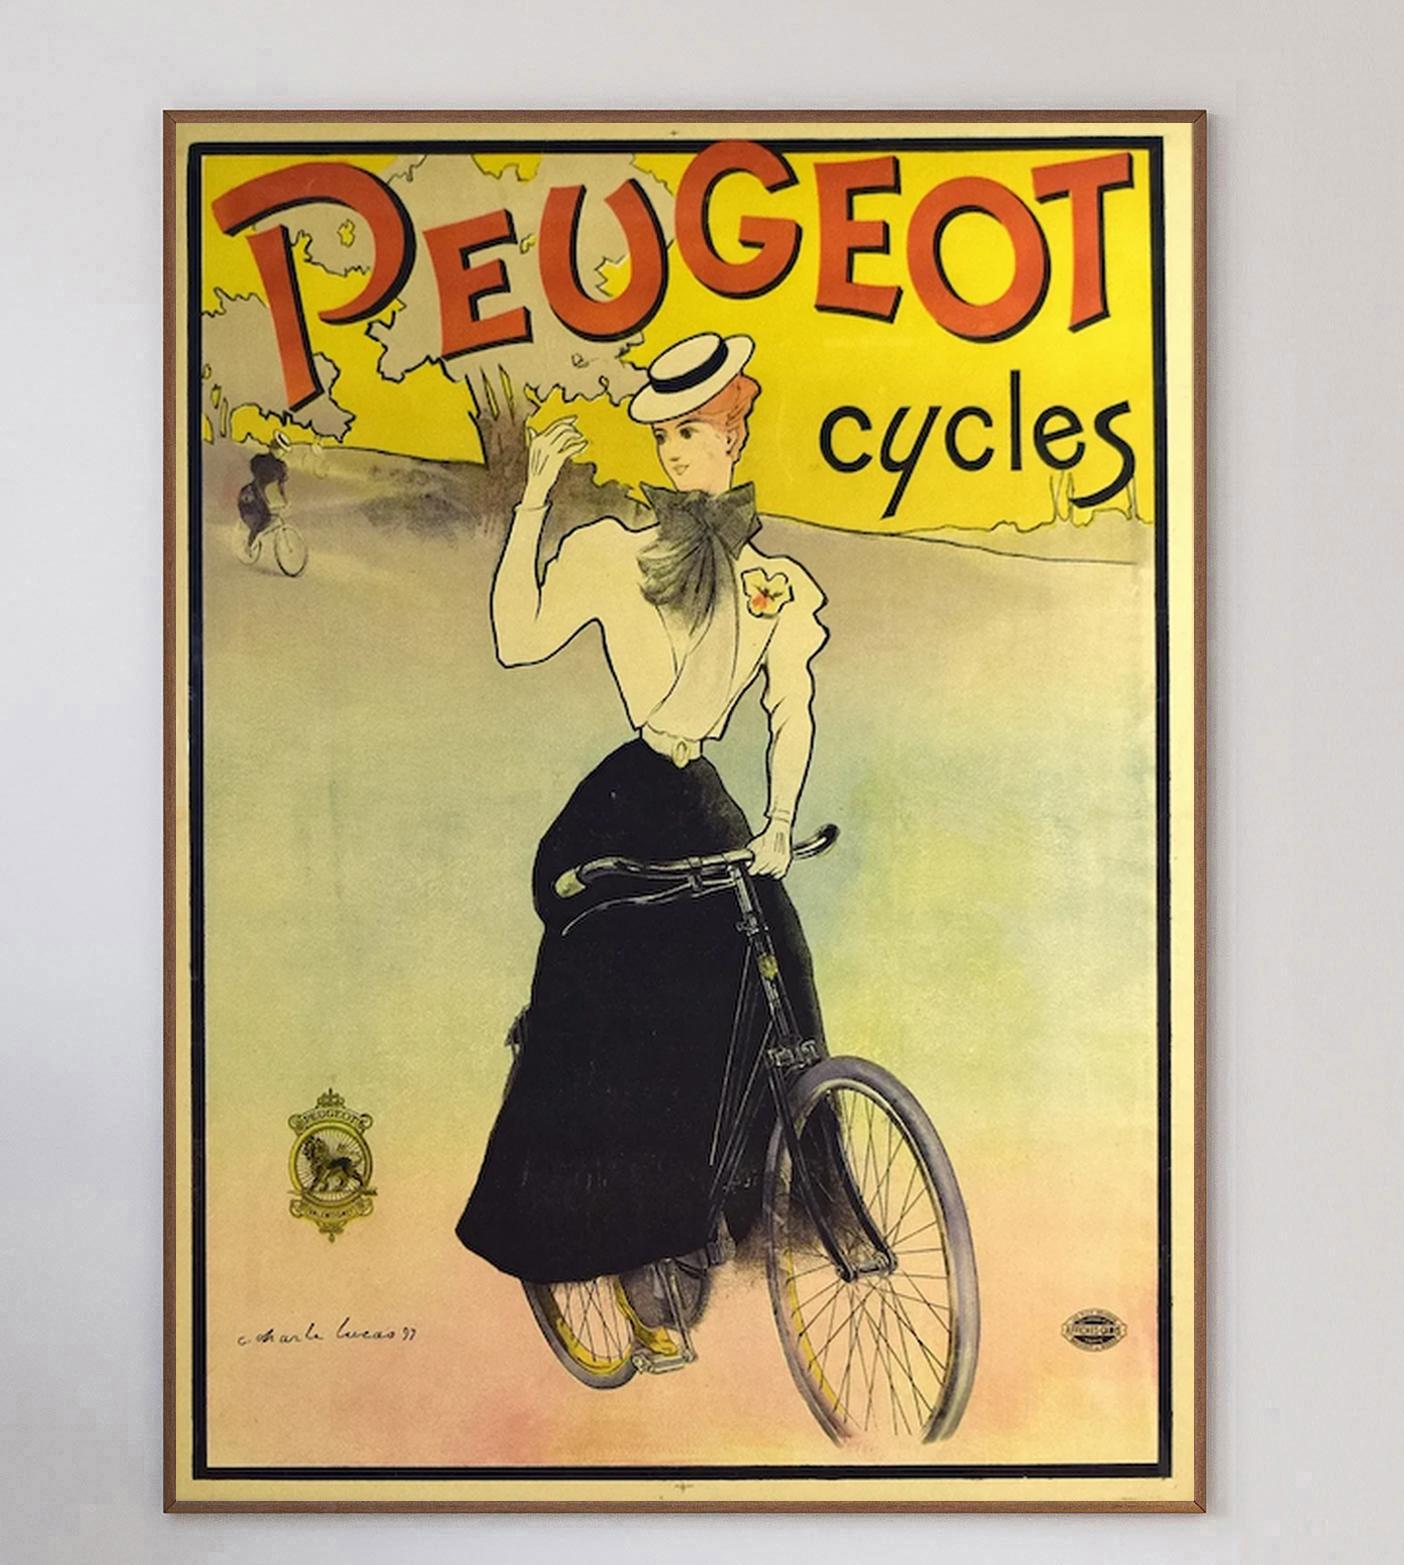 Stunning original lithograph poster for Peugeot Cycles by poster artist Charles Lucas. Originally printed in 1897 by Impremerie Camis in France. The artwork depicts a woman on a bicycle with vibrant yellow and red Peugeot Cycles text